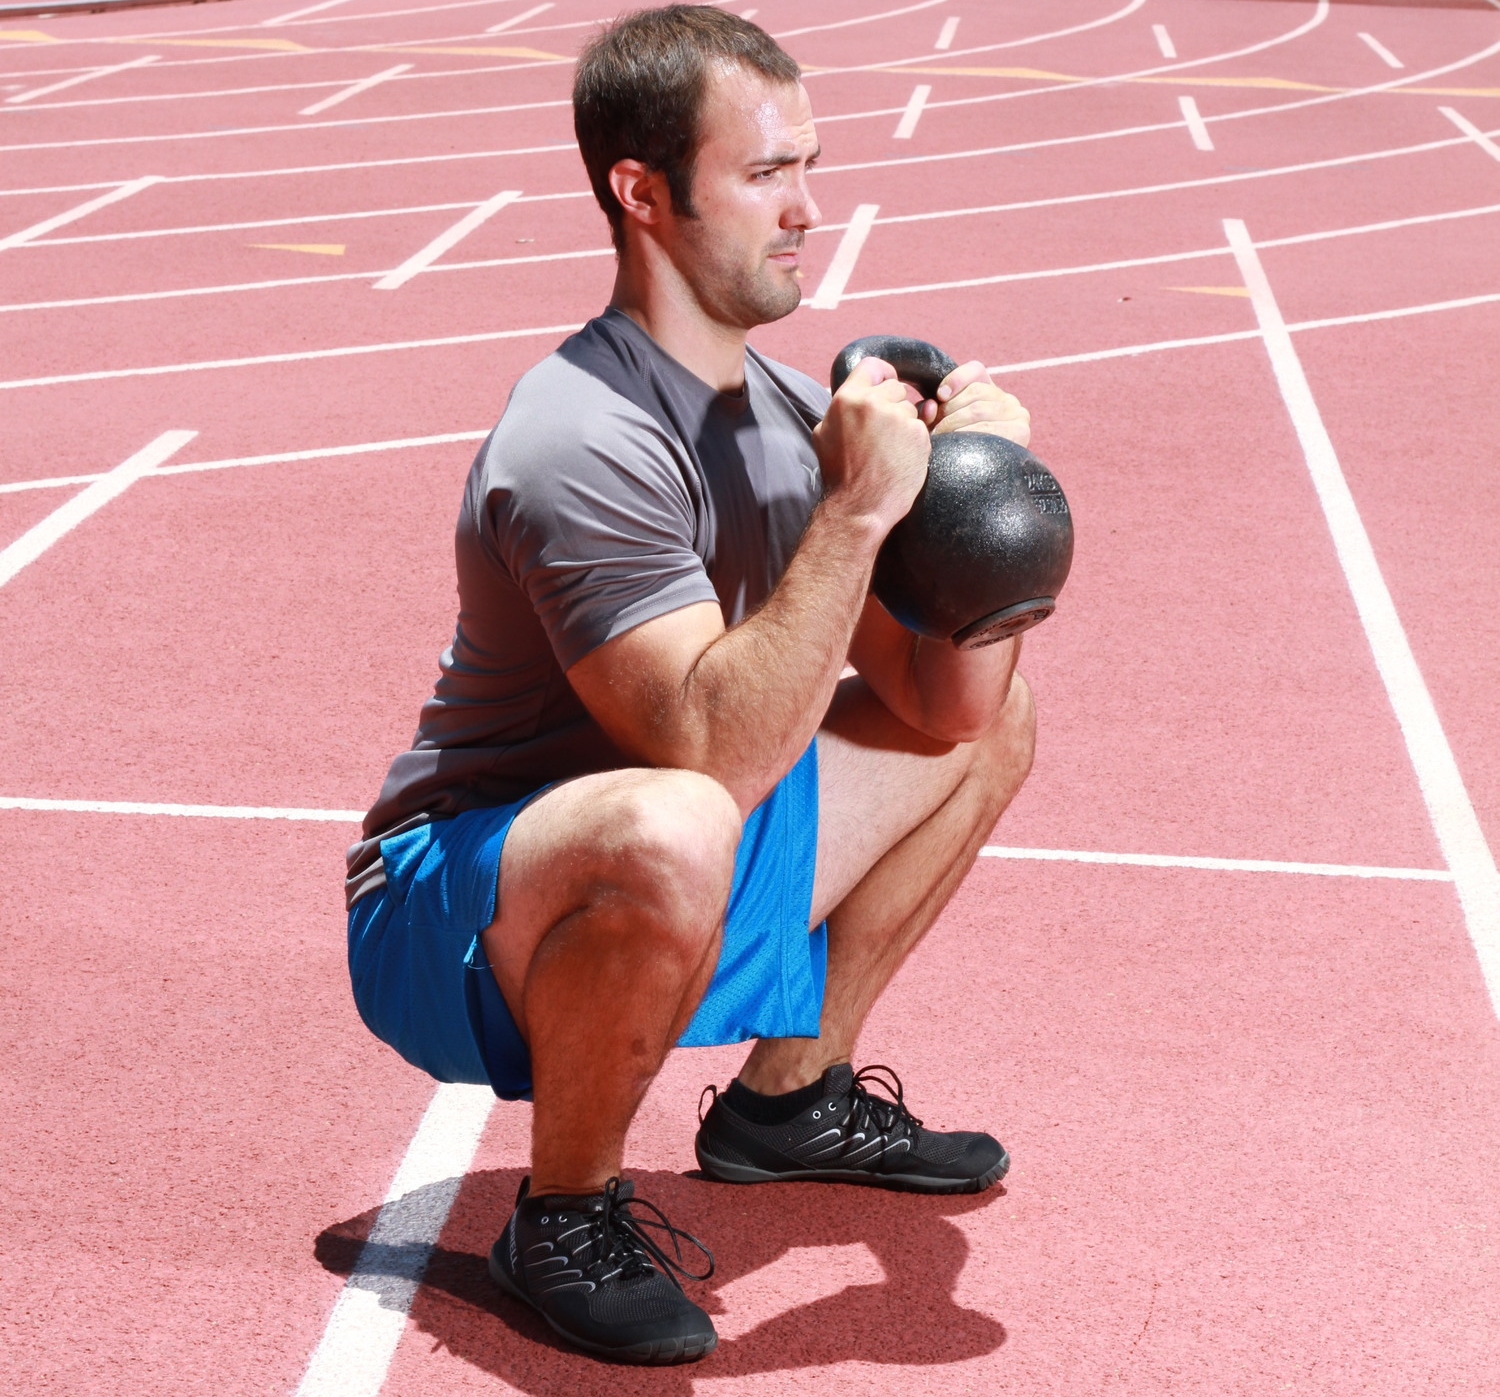 Personal trainer combining kettlebell goblet squats with a track workout in San Diego, CA. #deepsquatshappythoughts